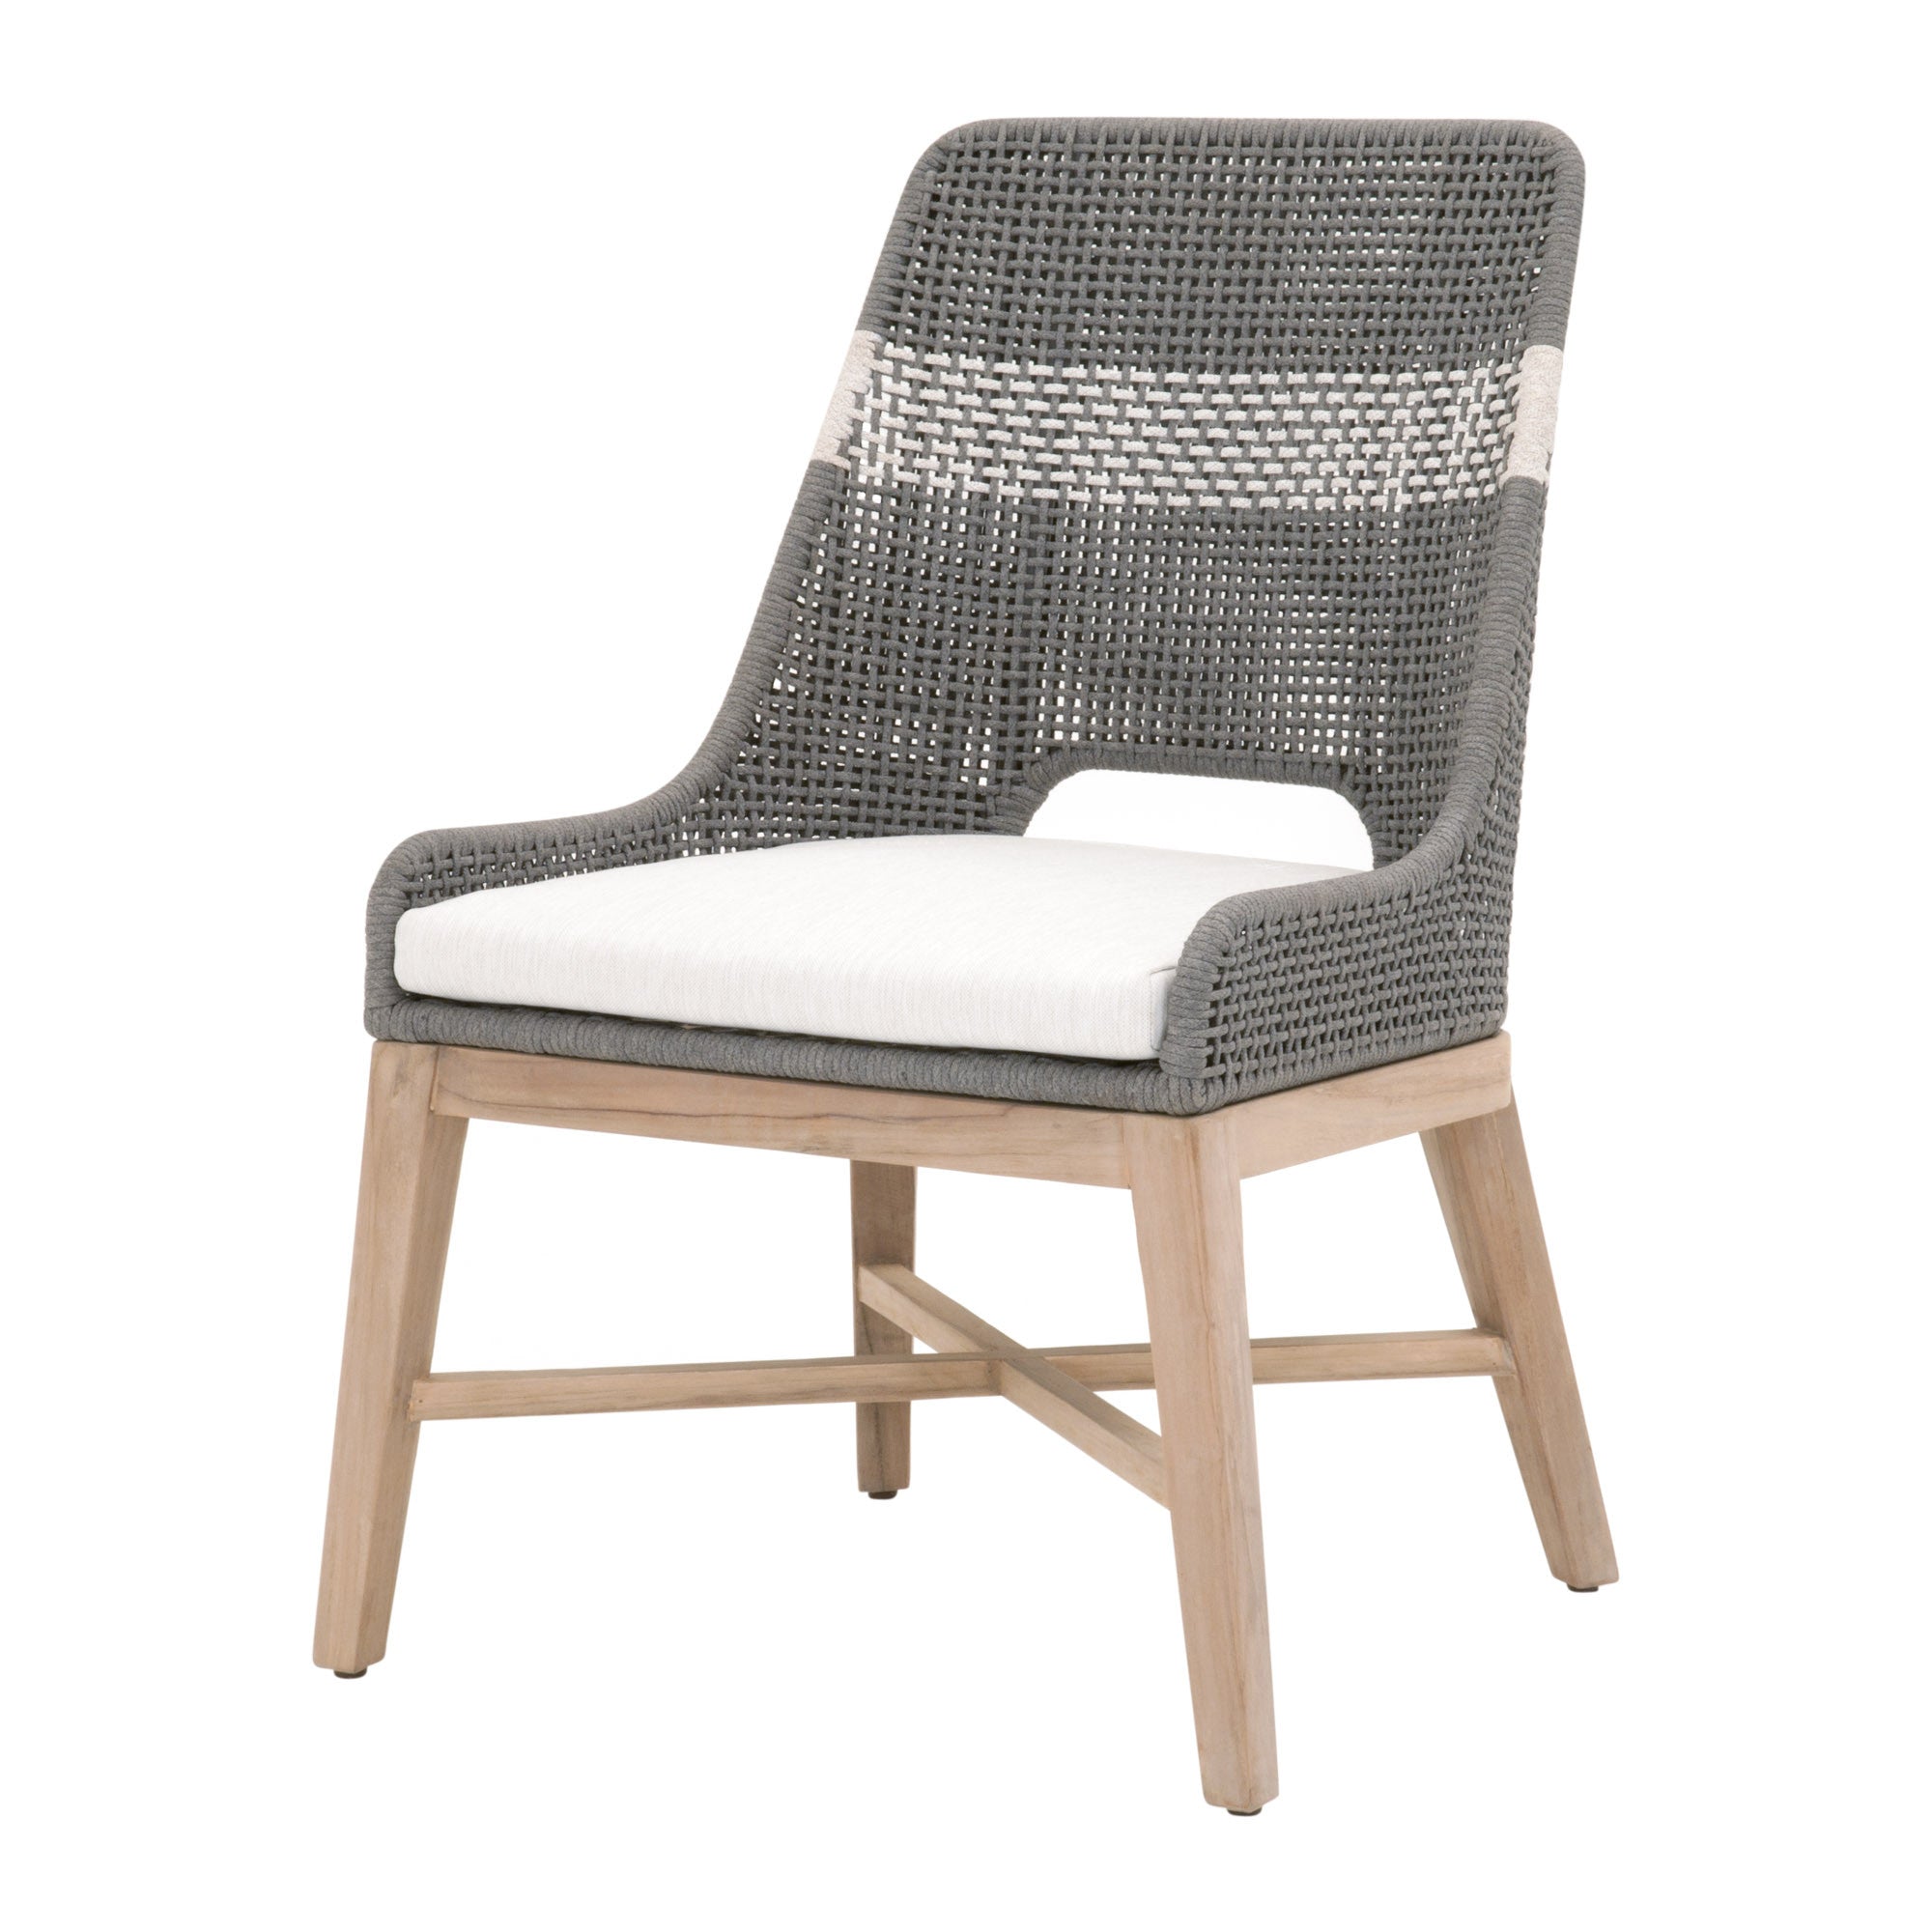 25" Set Of Two Gray And Natural Solid Wood Dining Chair With Light Gray Cushion - Tuesday Morning-Outdoor Chairs